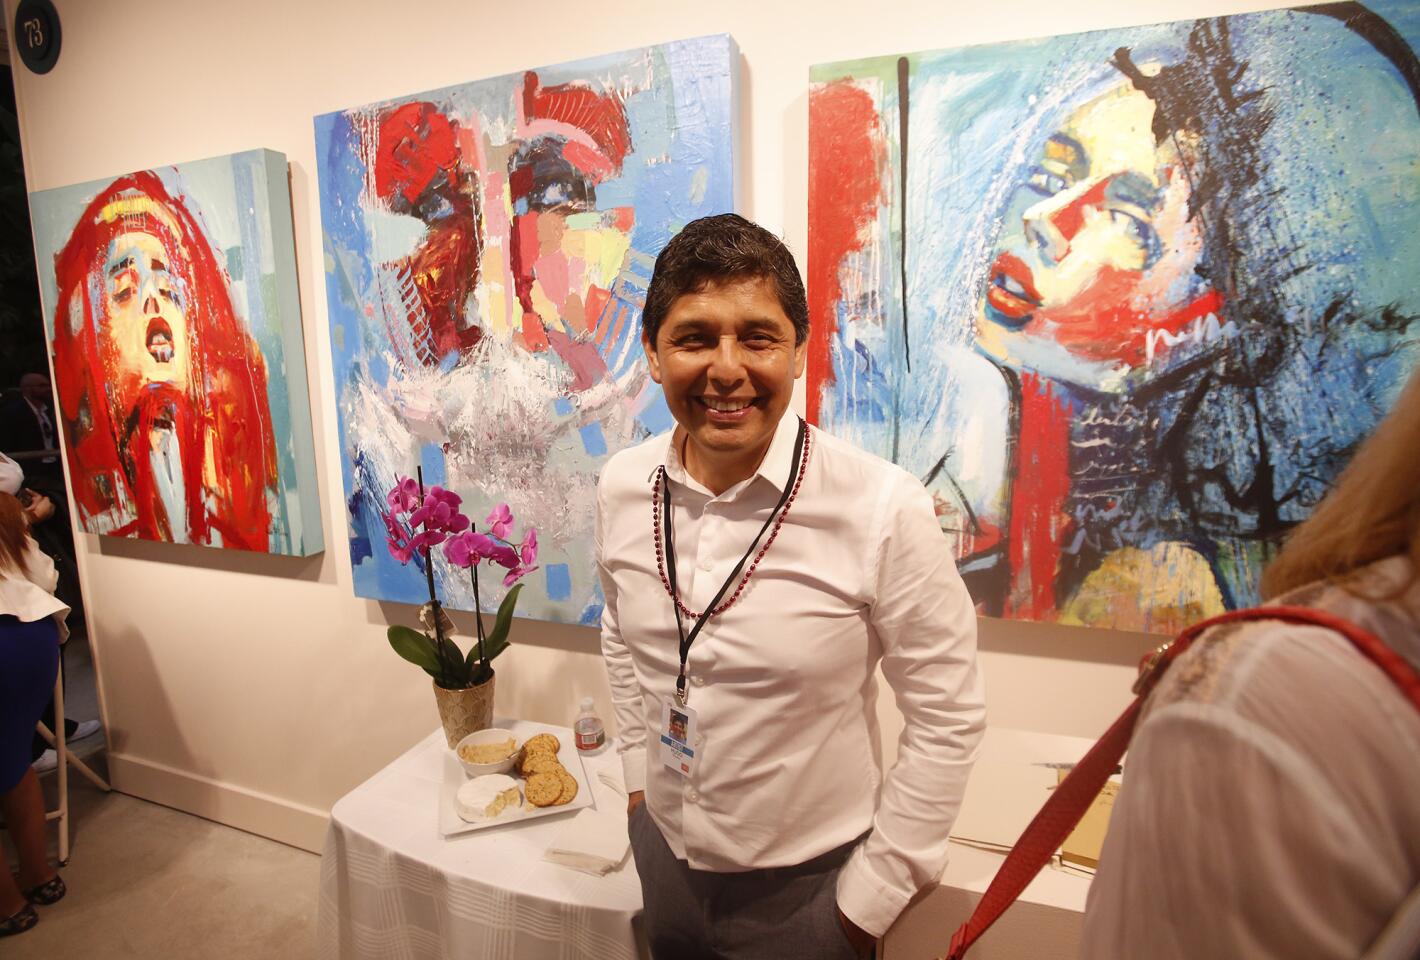 Festival of Arts artist preview night and party